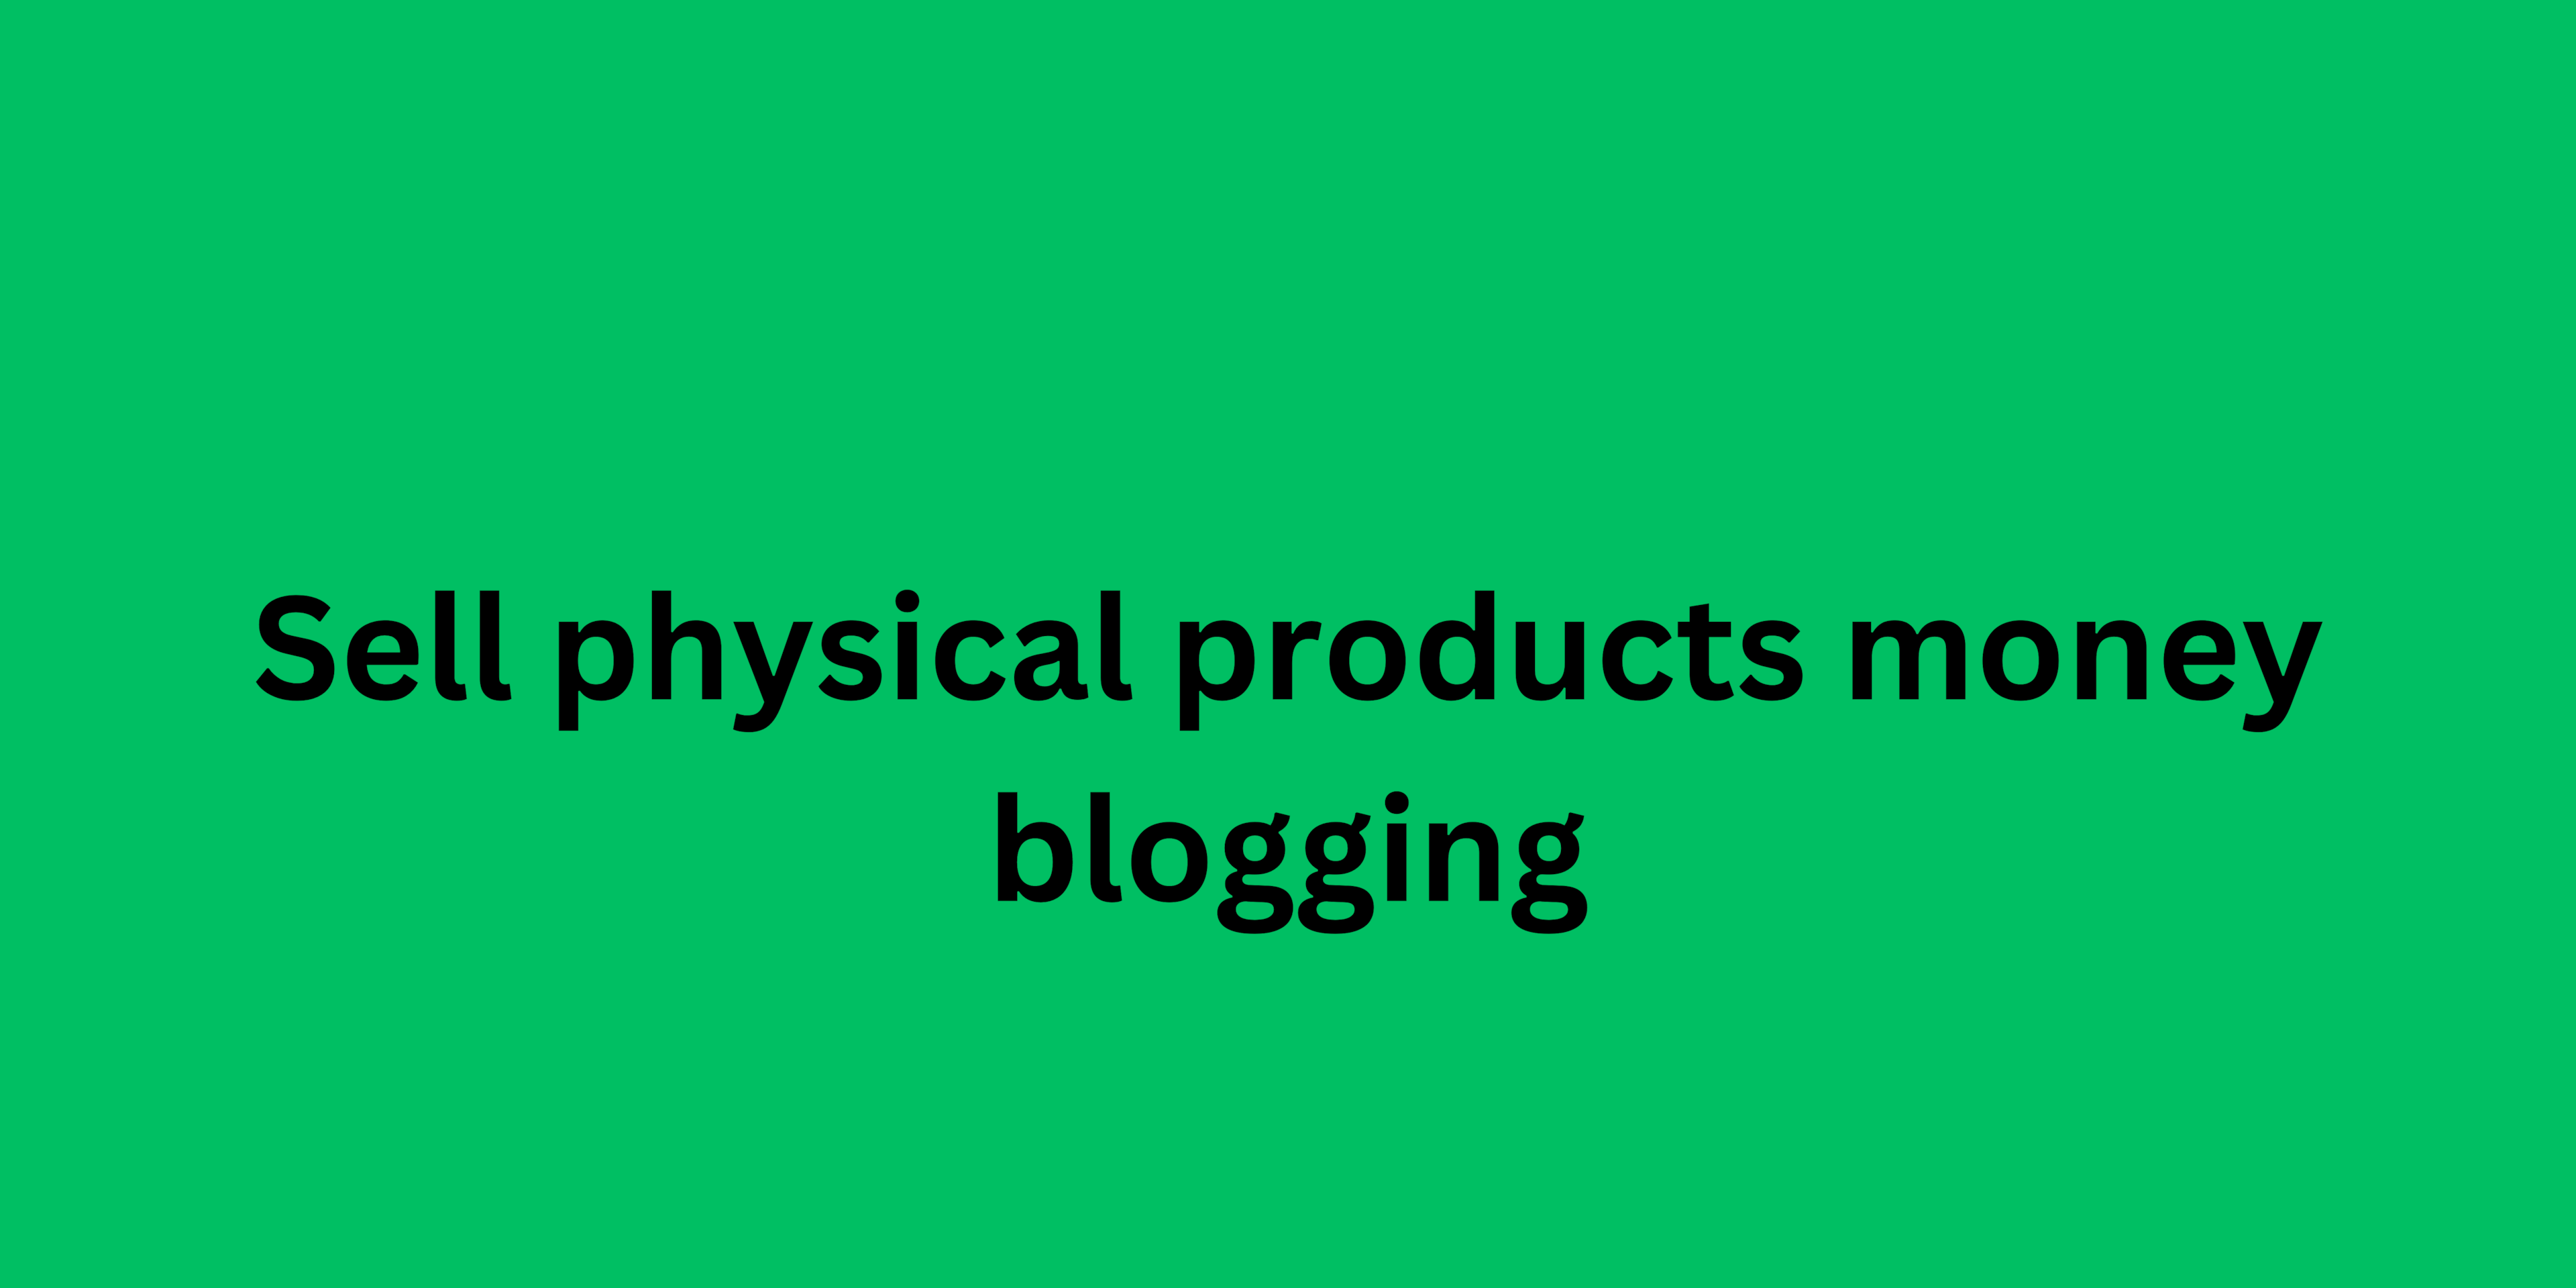 Sell physical products money blogging